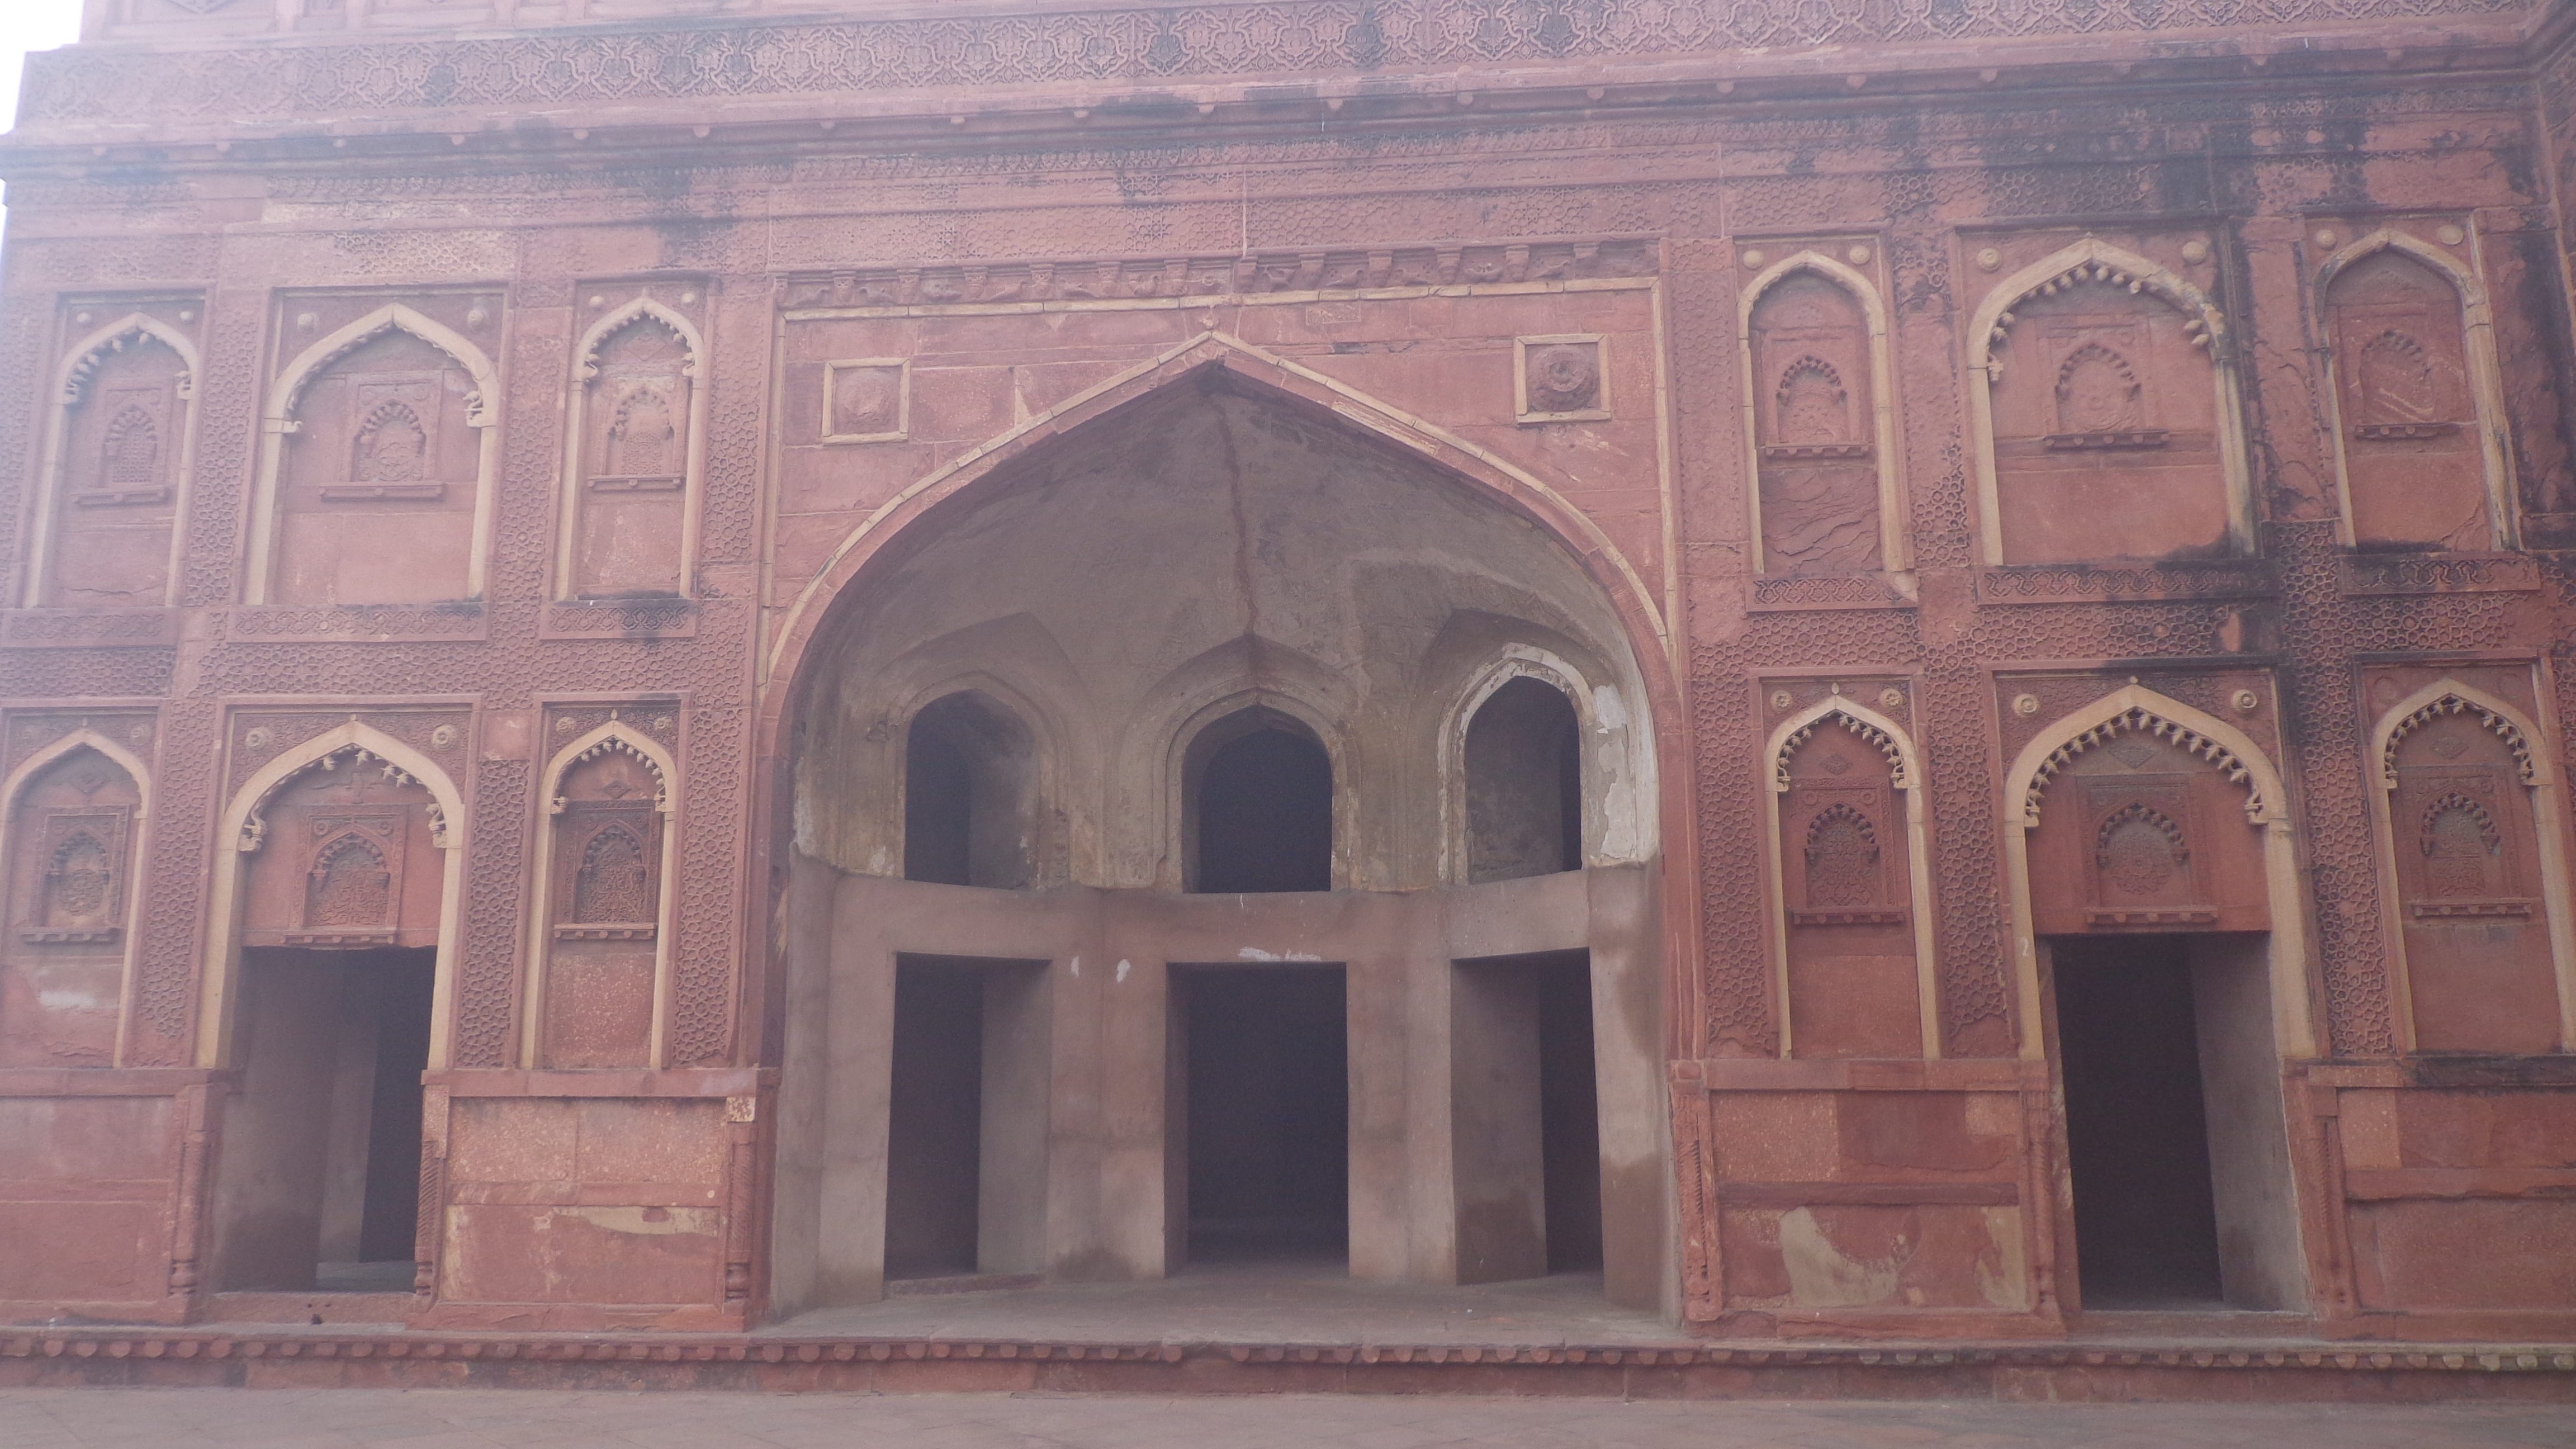 FORT. Agra Fort is one of the many forts in the country that housed royalty and is often the center of power. 